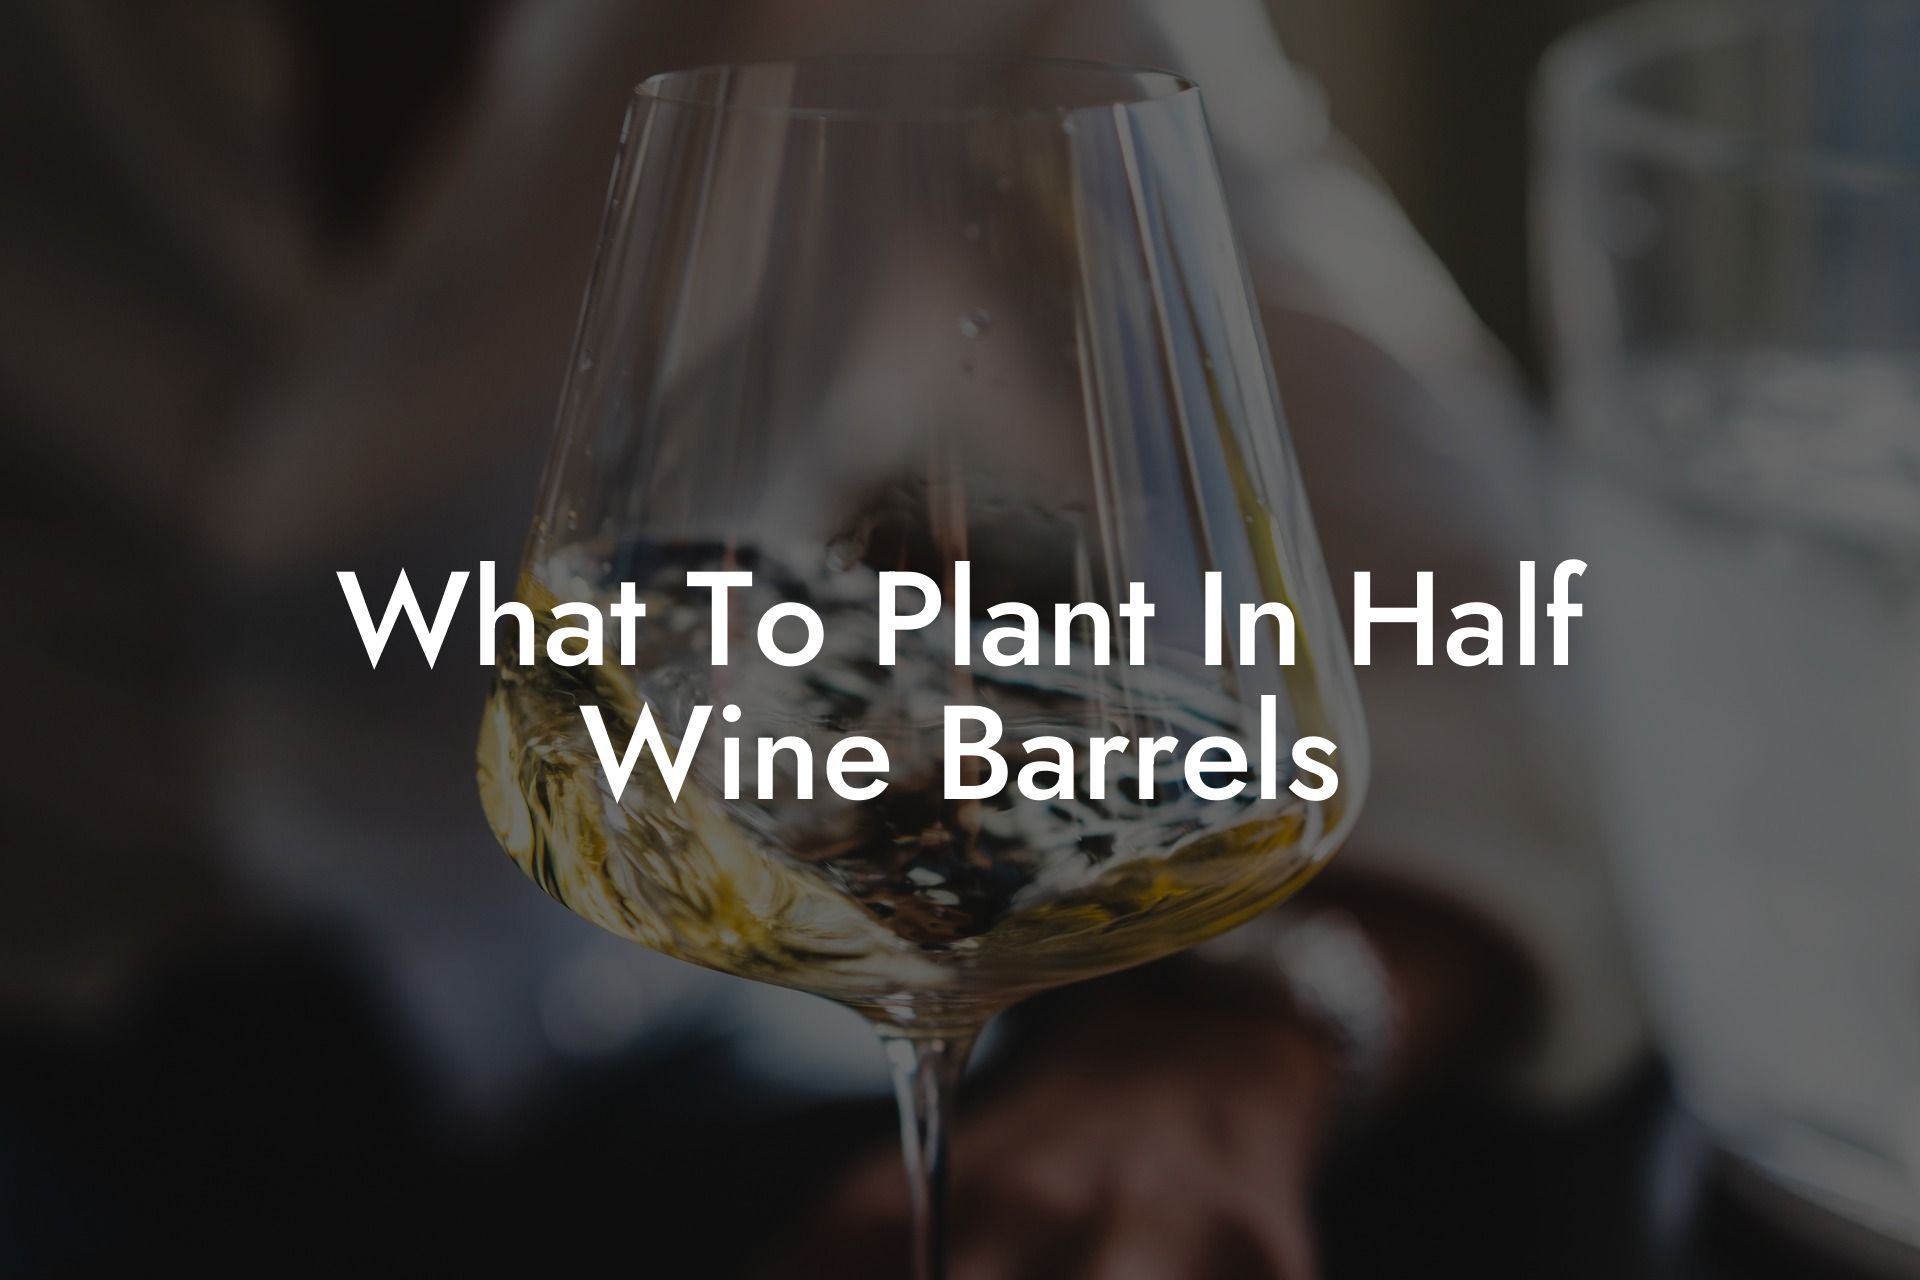 What To Plant In Half Wine Barrels